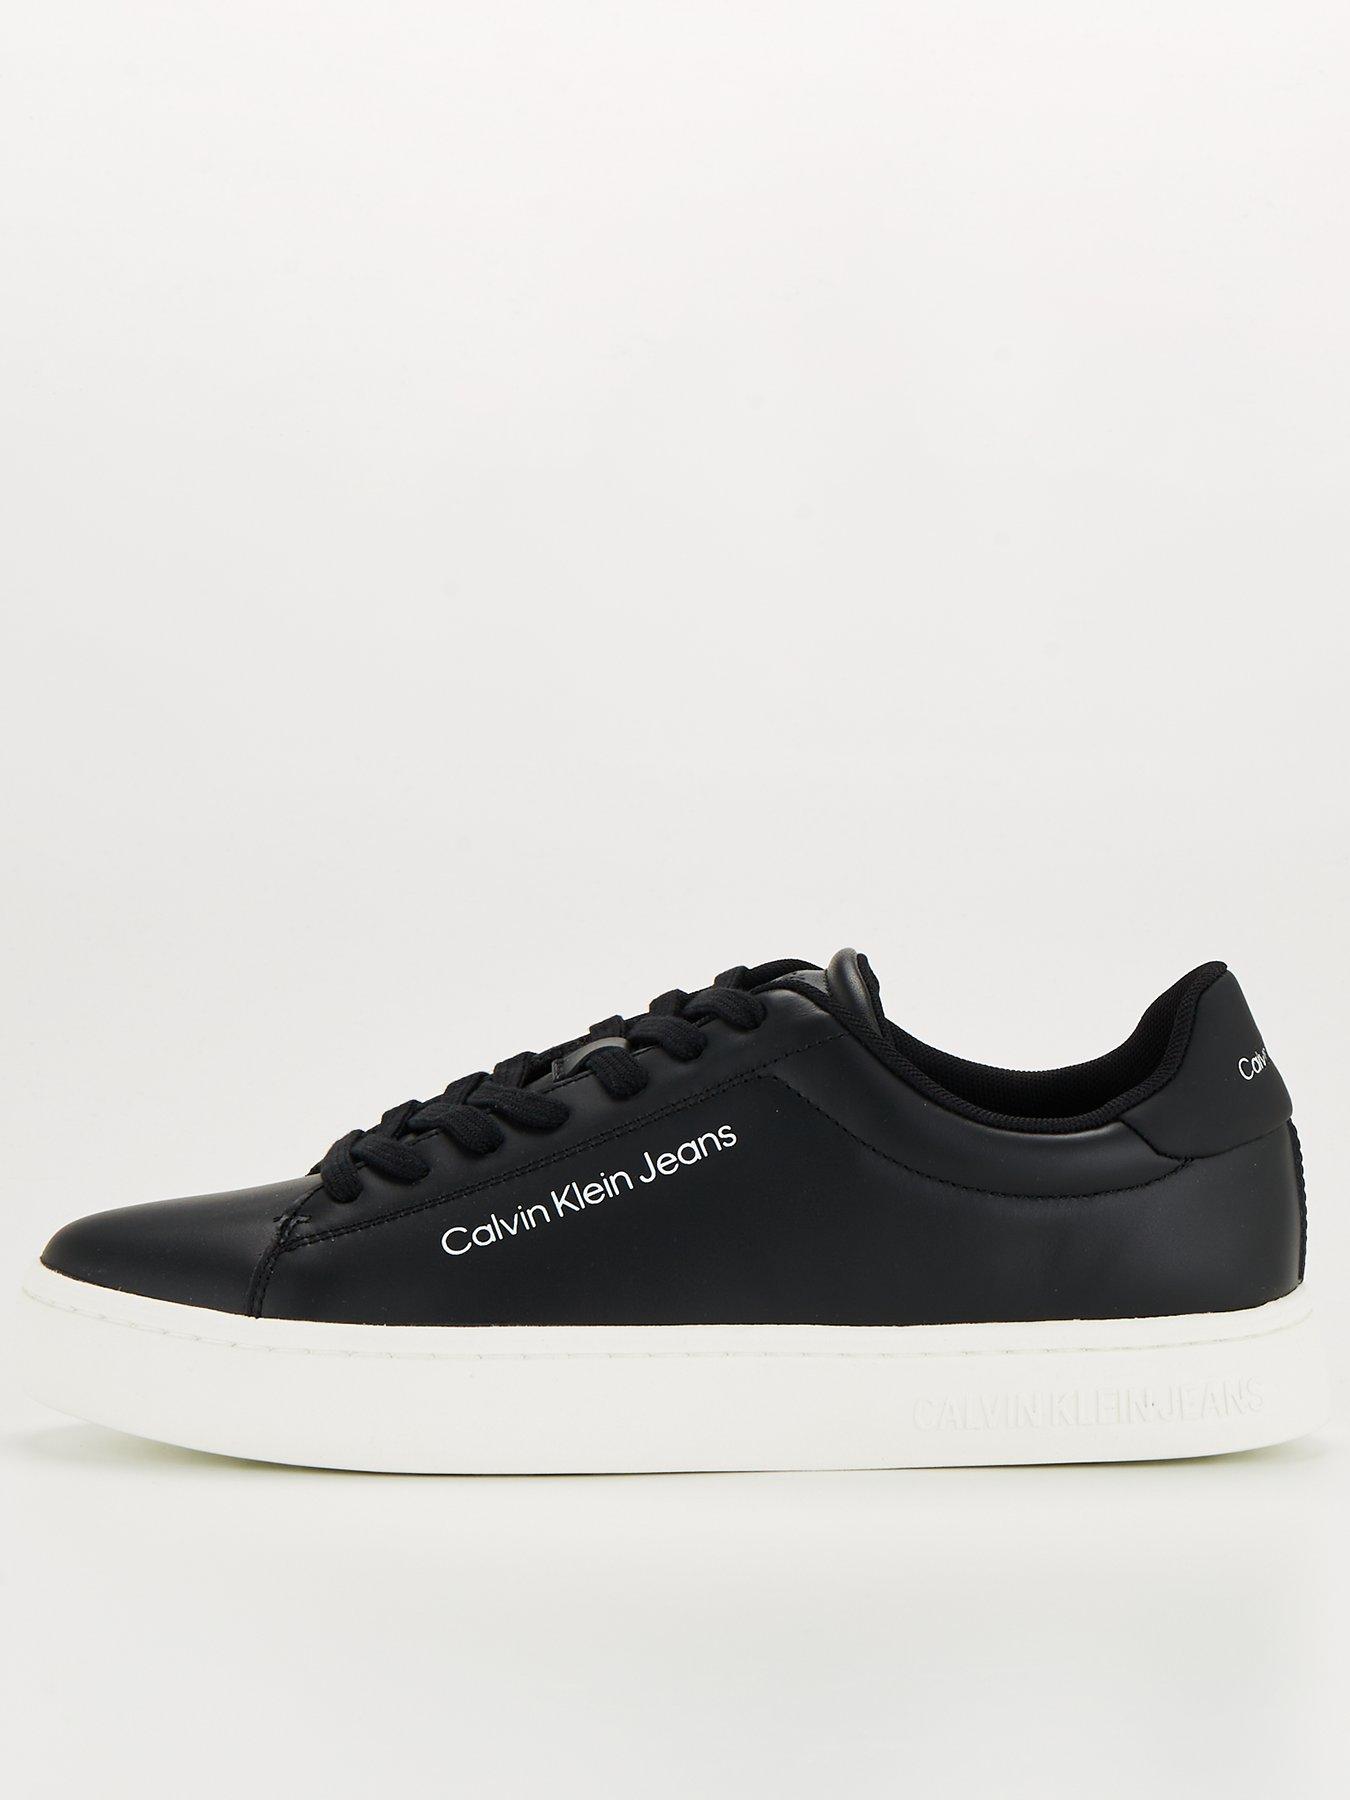 Calvin Klein Jeans Classic Cupsole Lace-Up Leather Trainer - Black/White